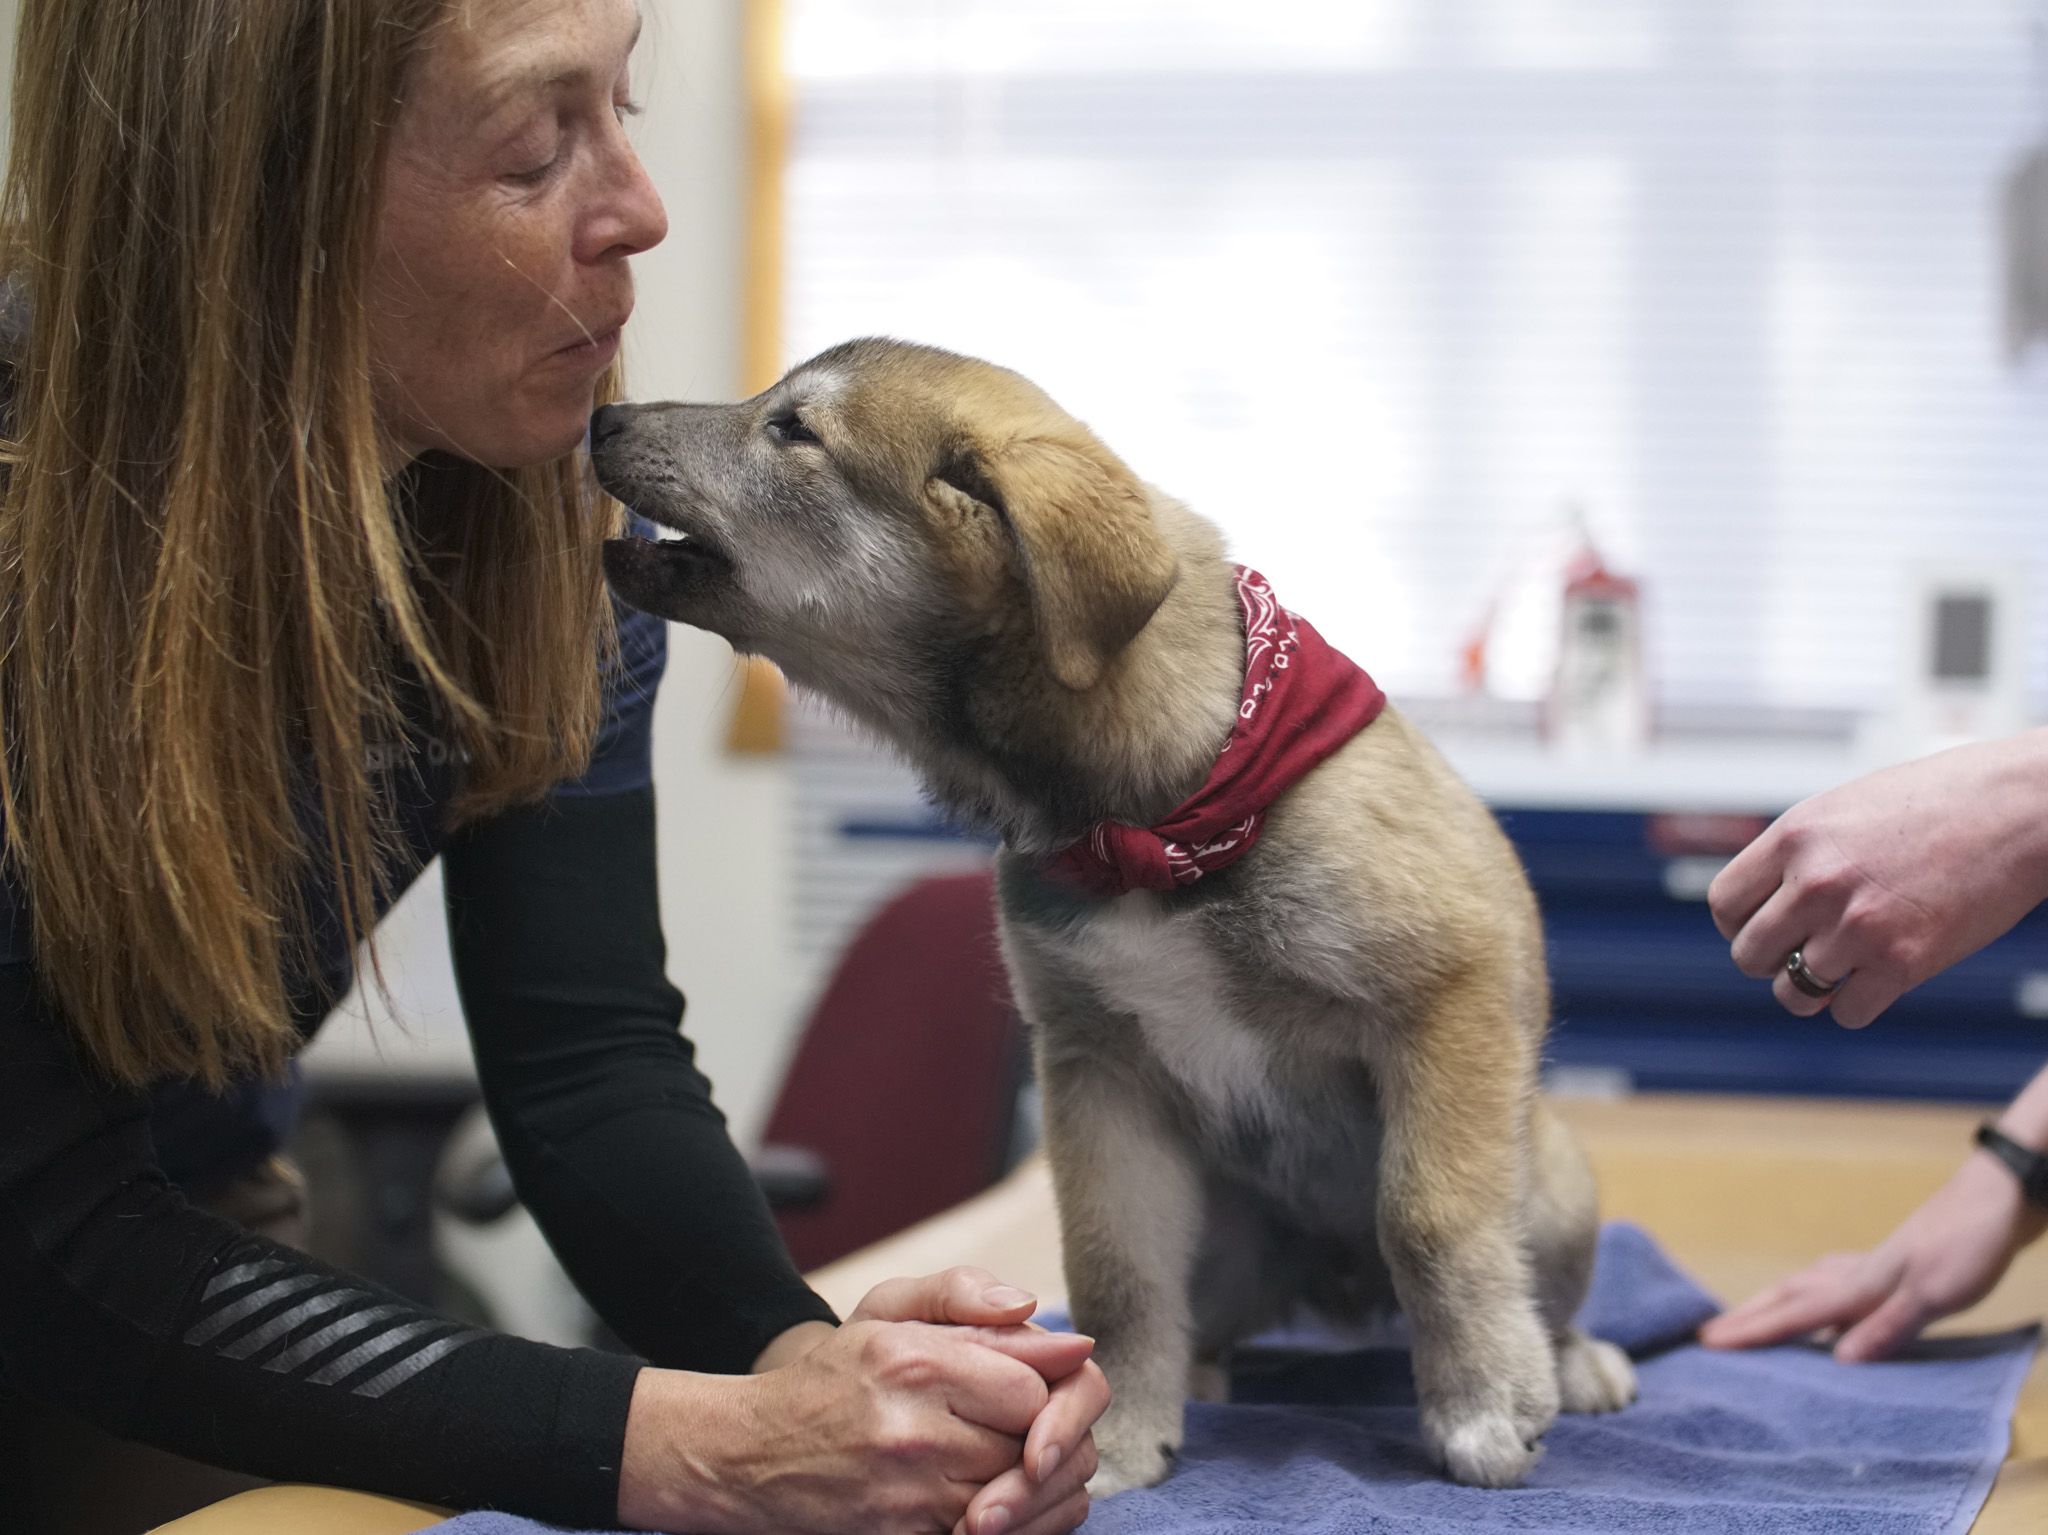 Dr. Michelle Oakley greets Eider the puppy. This image is from Dr. Oakley, Yukon Vet. [Photo of the day - November 2020]